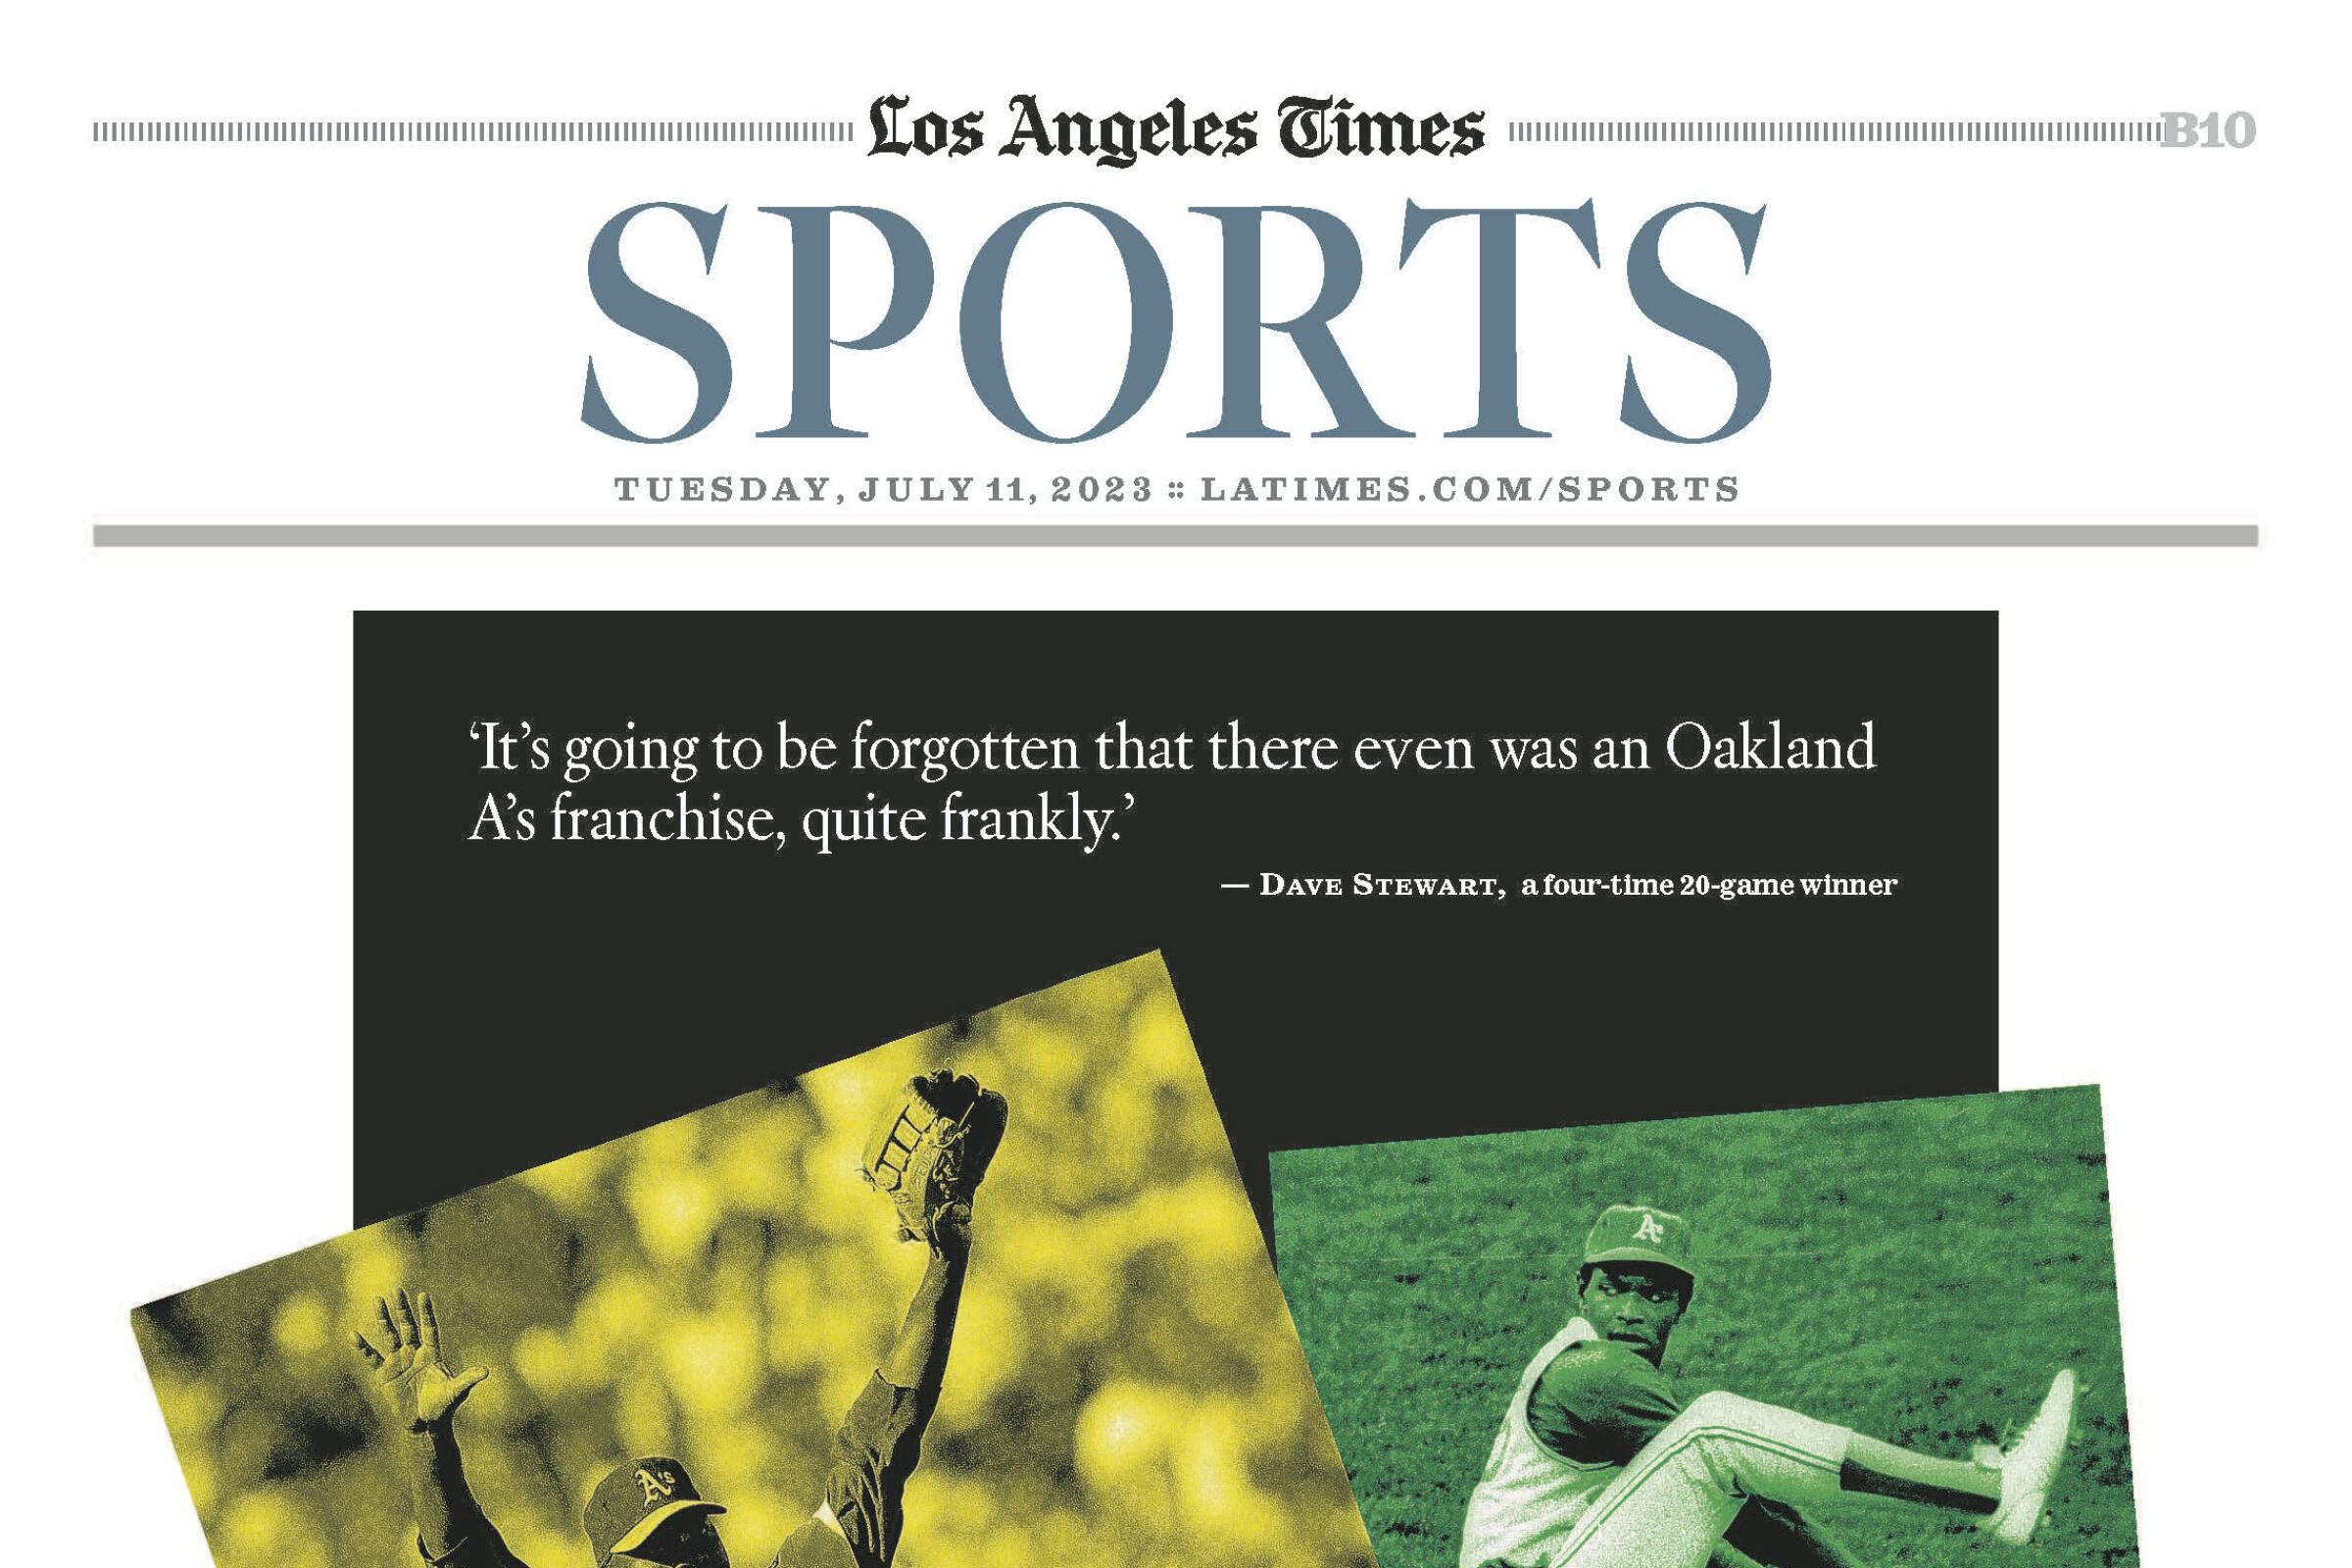 An illustration that includes sports photos and part of The Times Sports section cover